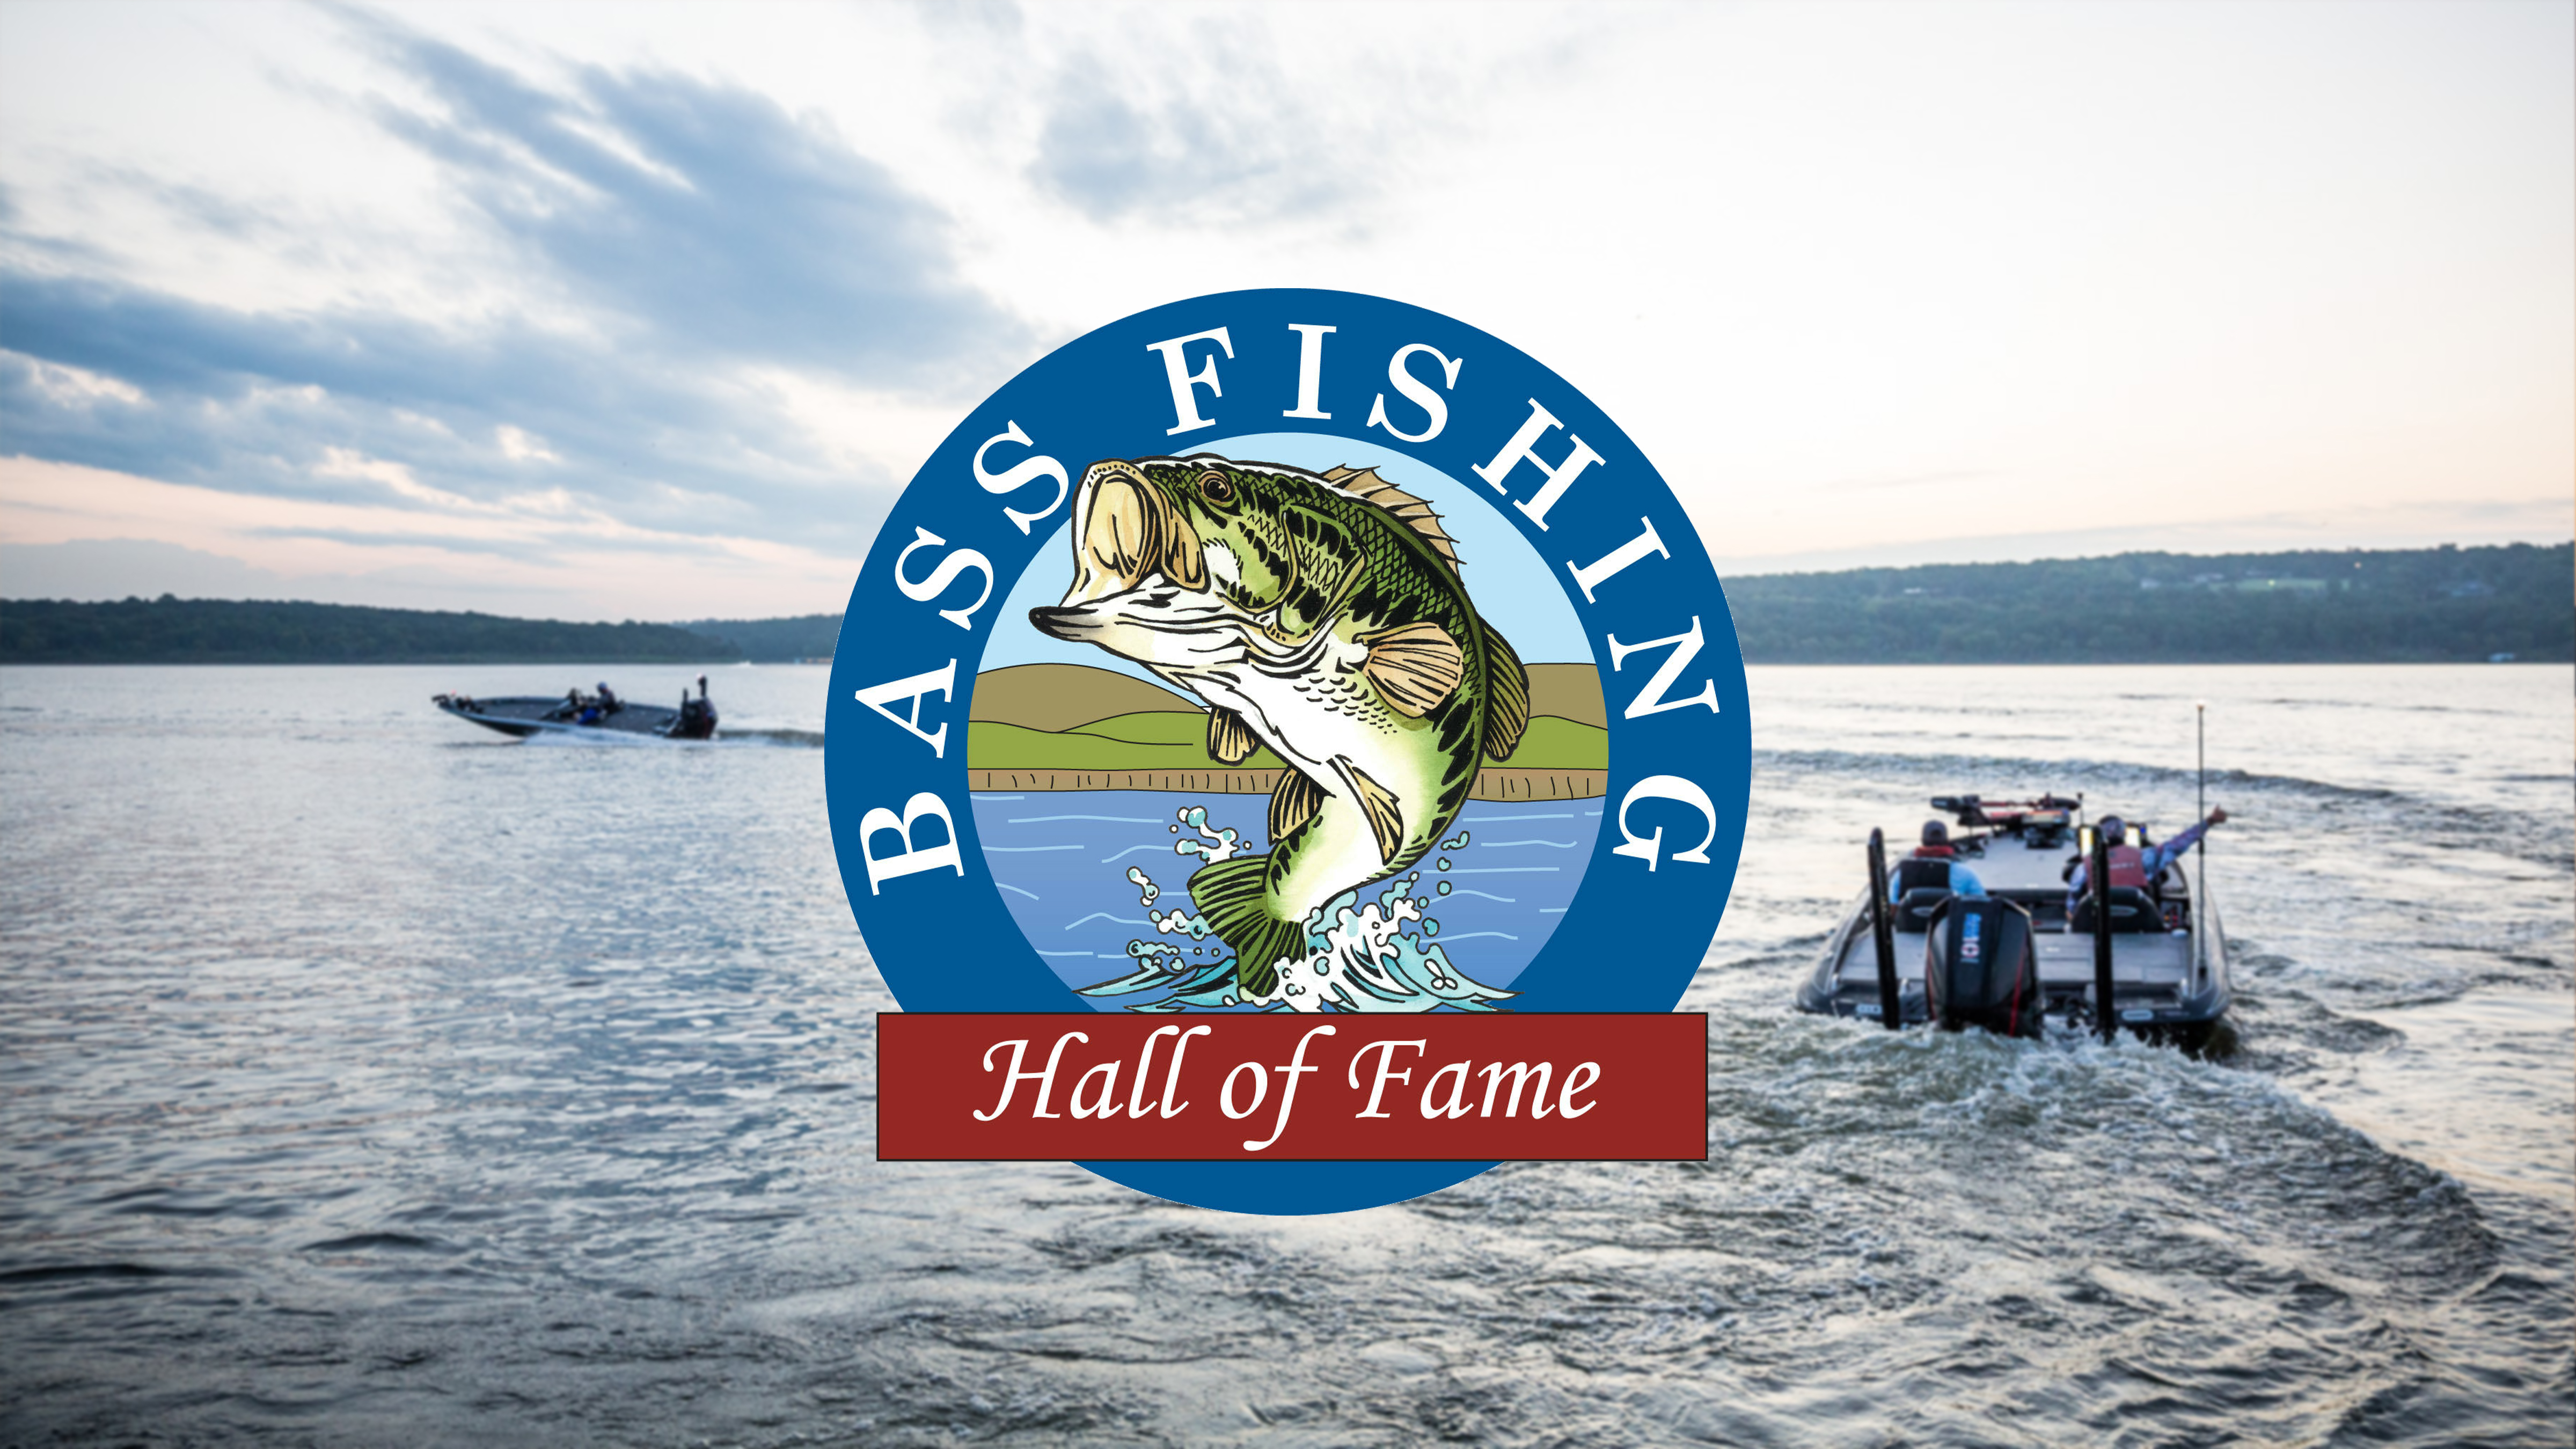 Annual Bass Fishing Hall of Fame Auction Goes Digital - Major